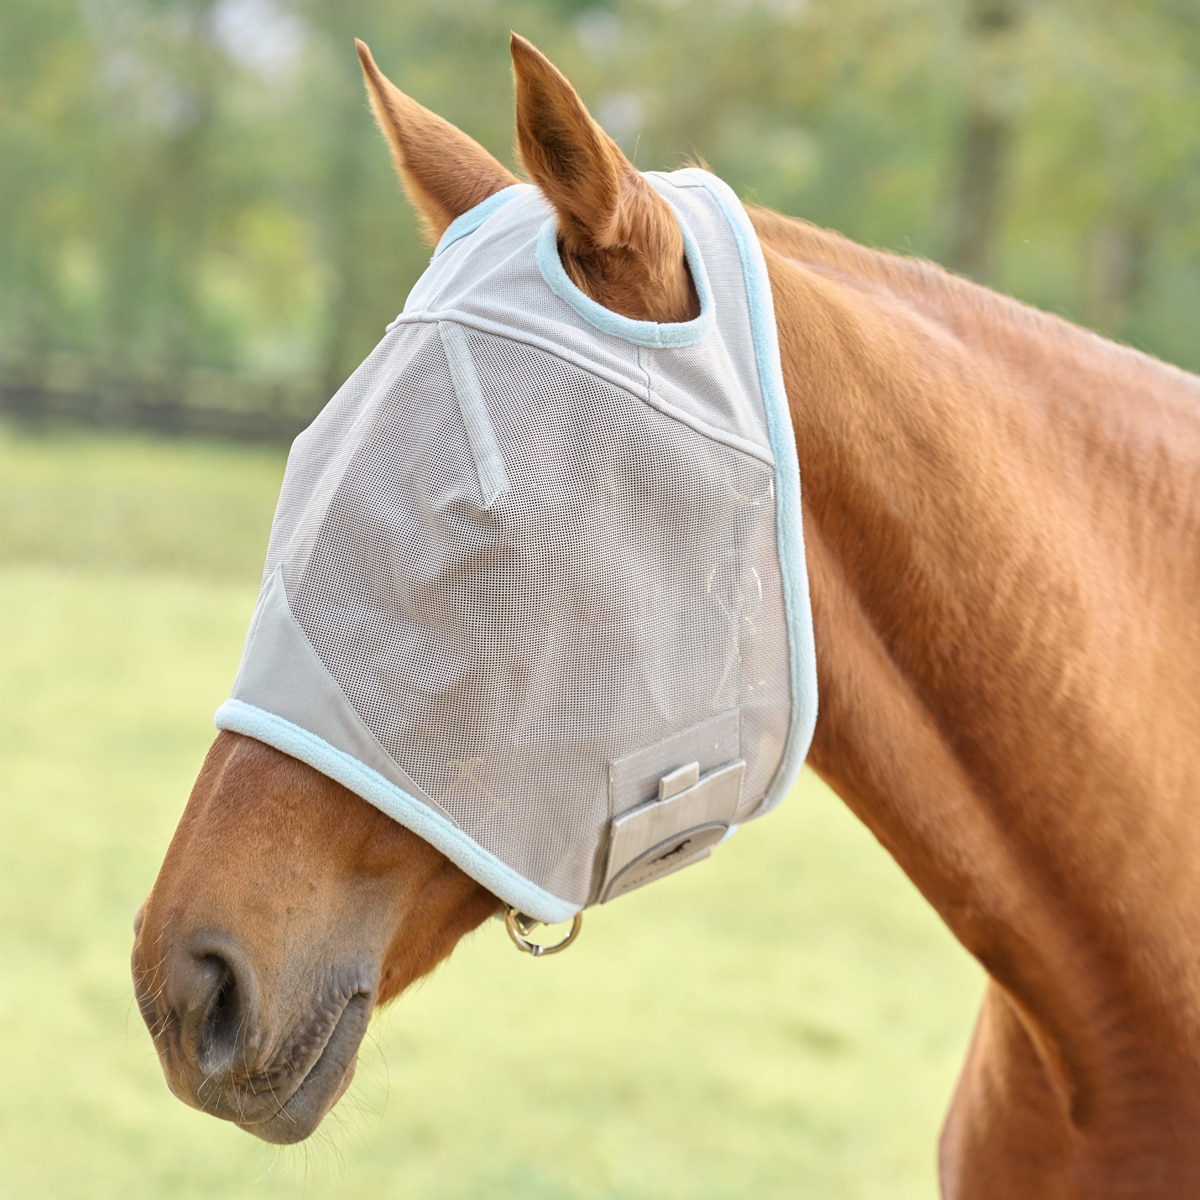 SILVER Details about   NEW SmartPak Classic Standard Horse Fly UV Mask without Ears COB